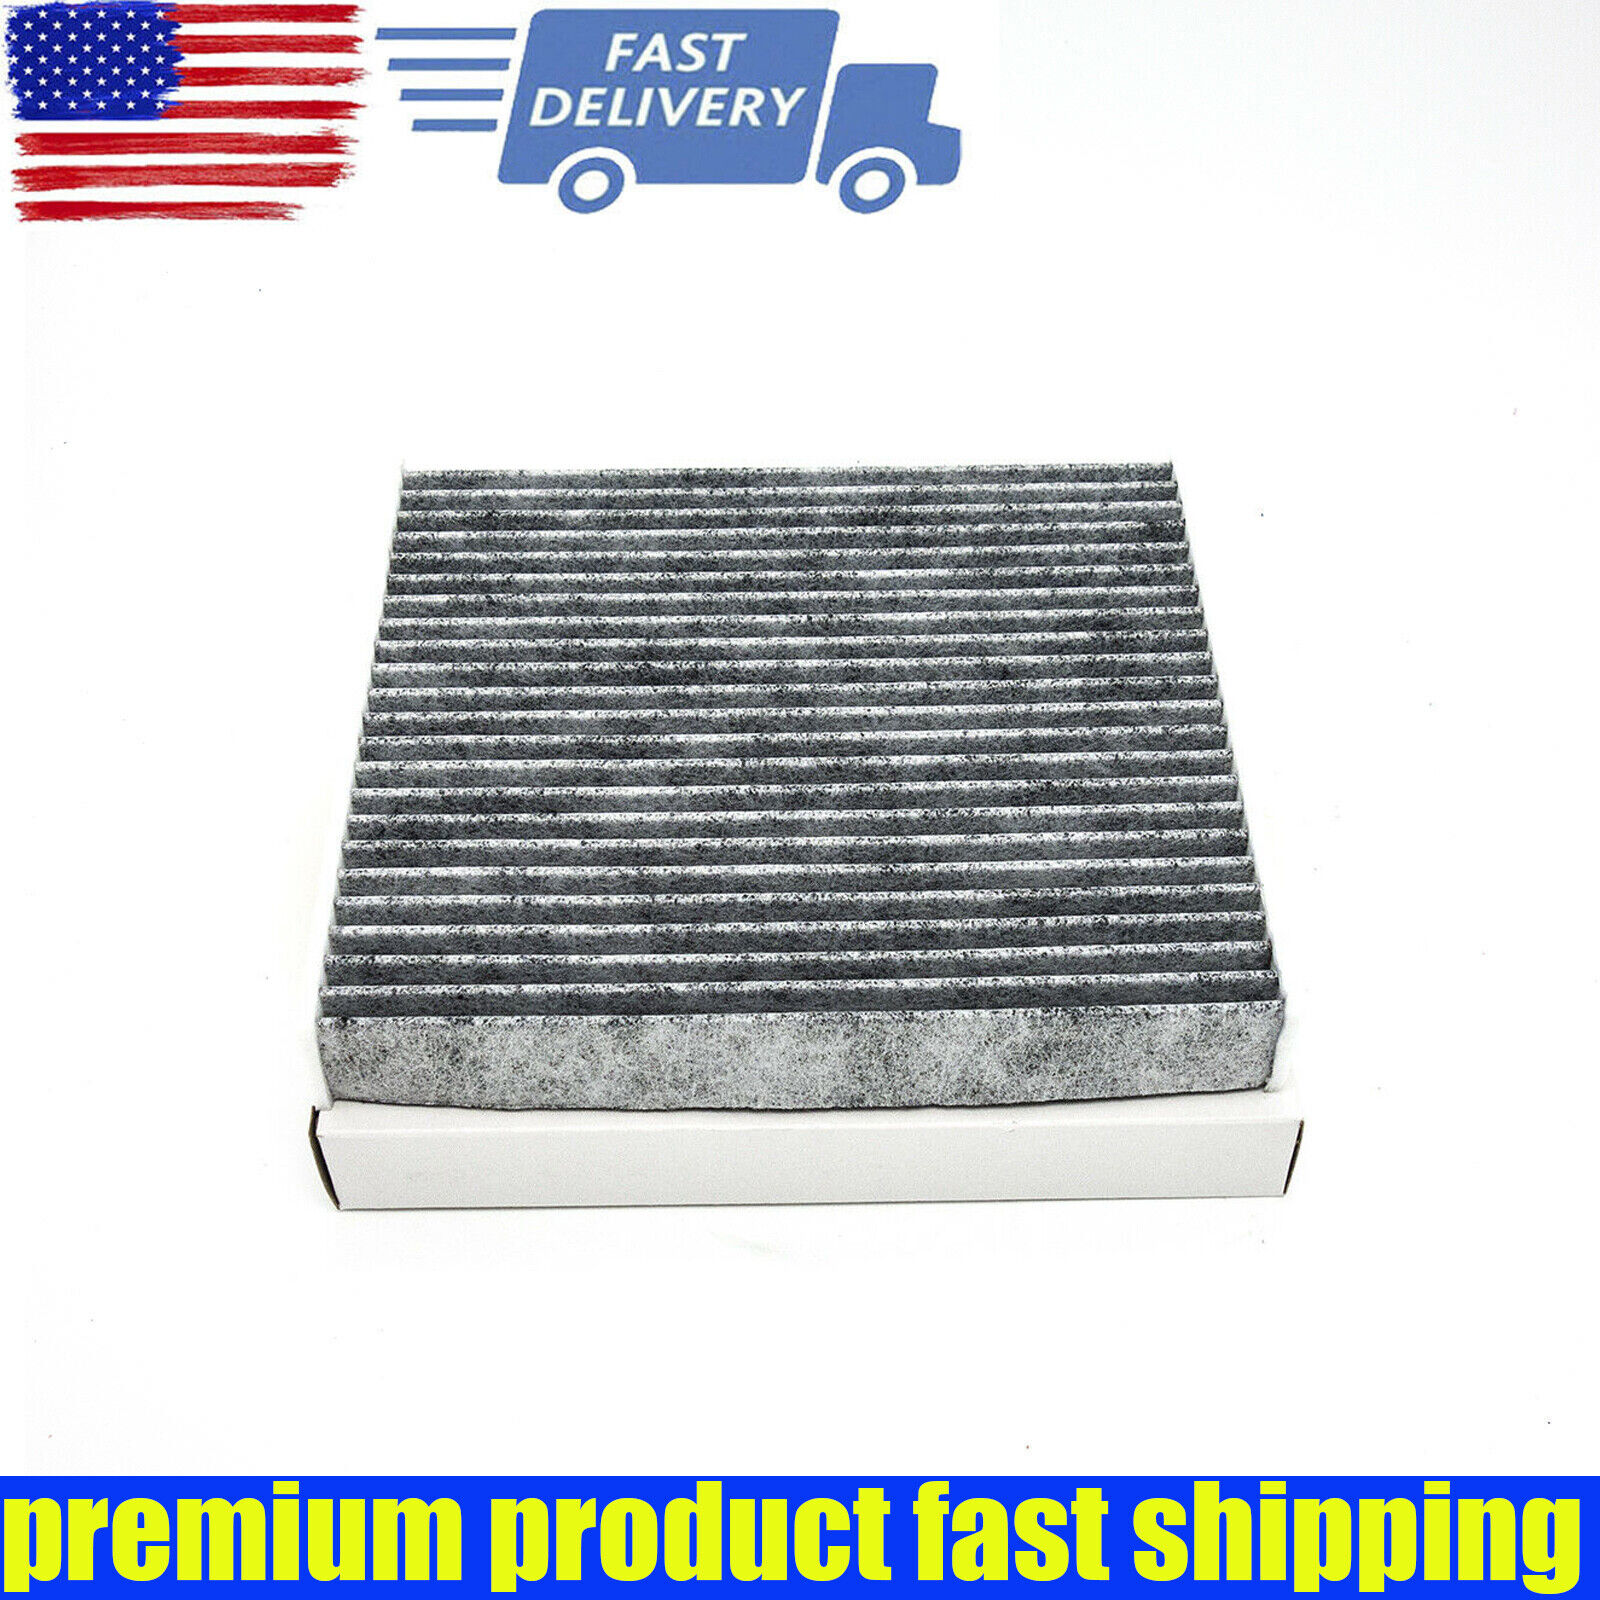 NEW Cabin Air Filter (CF10285), Activated Carbon For Fits Toyota,Lexus US